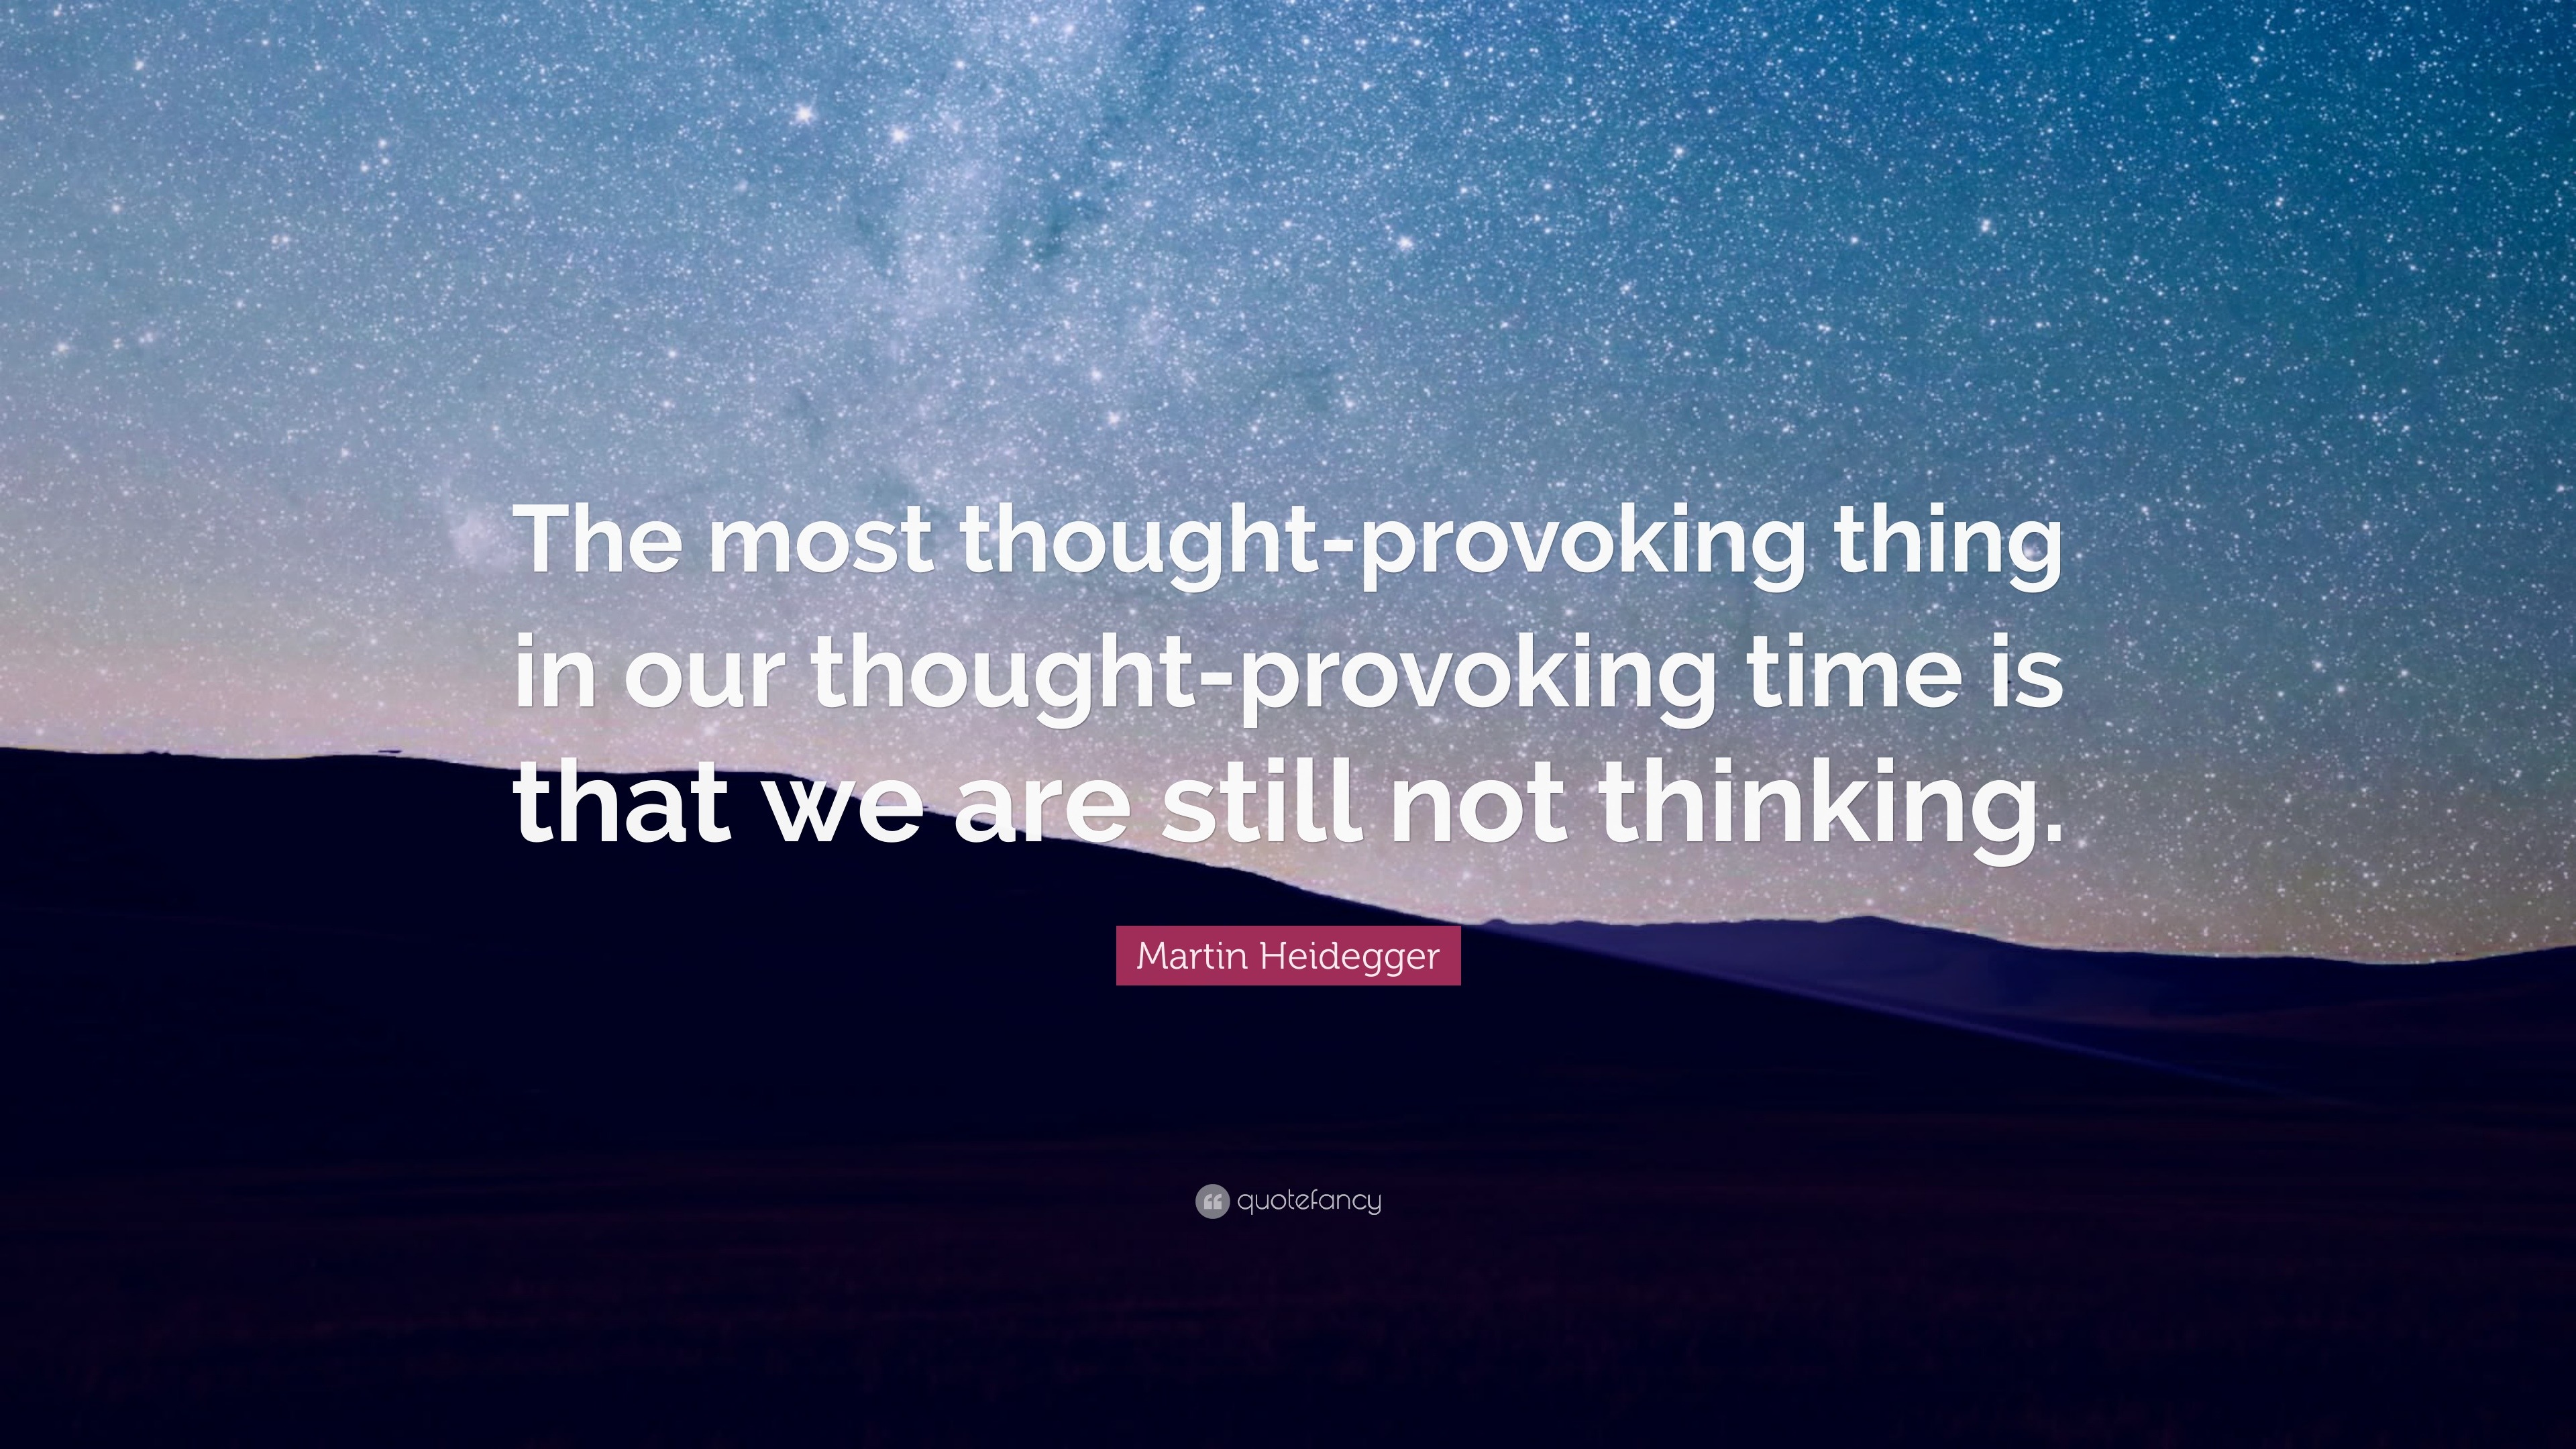 Martin Heidegger Quote: "The most thought-provoking thing ...